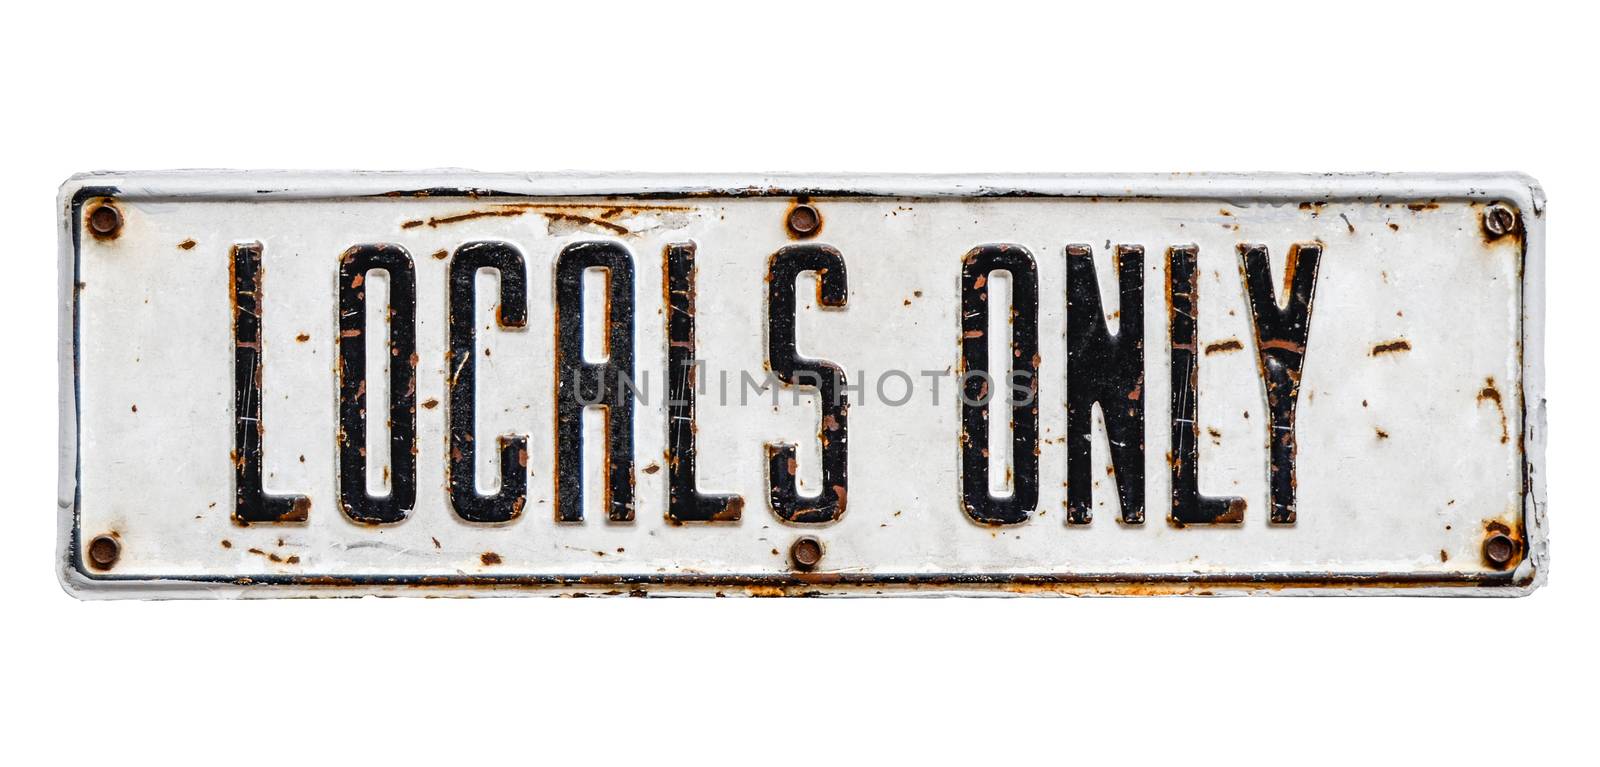 An Isolated Rusty Locals Only Street Sign From A Small Beach Community On A White Background